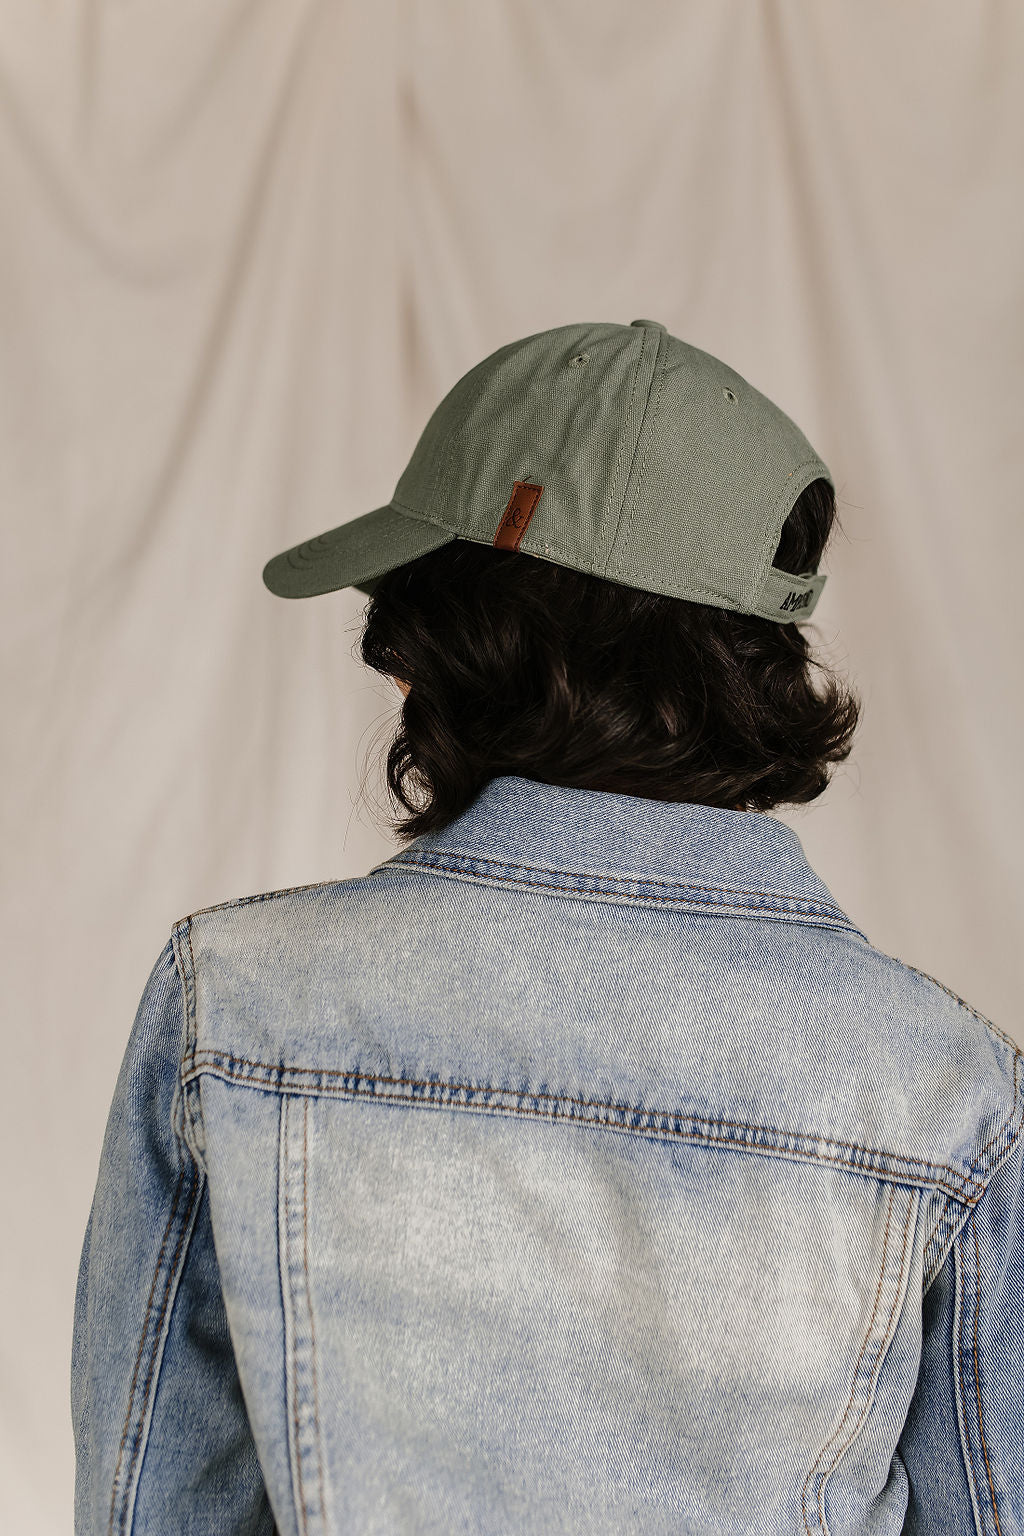 Baseball Hat in Vintage Vogue by Ampersand Ave